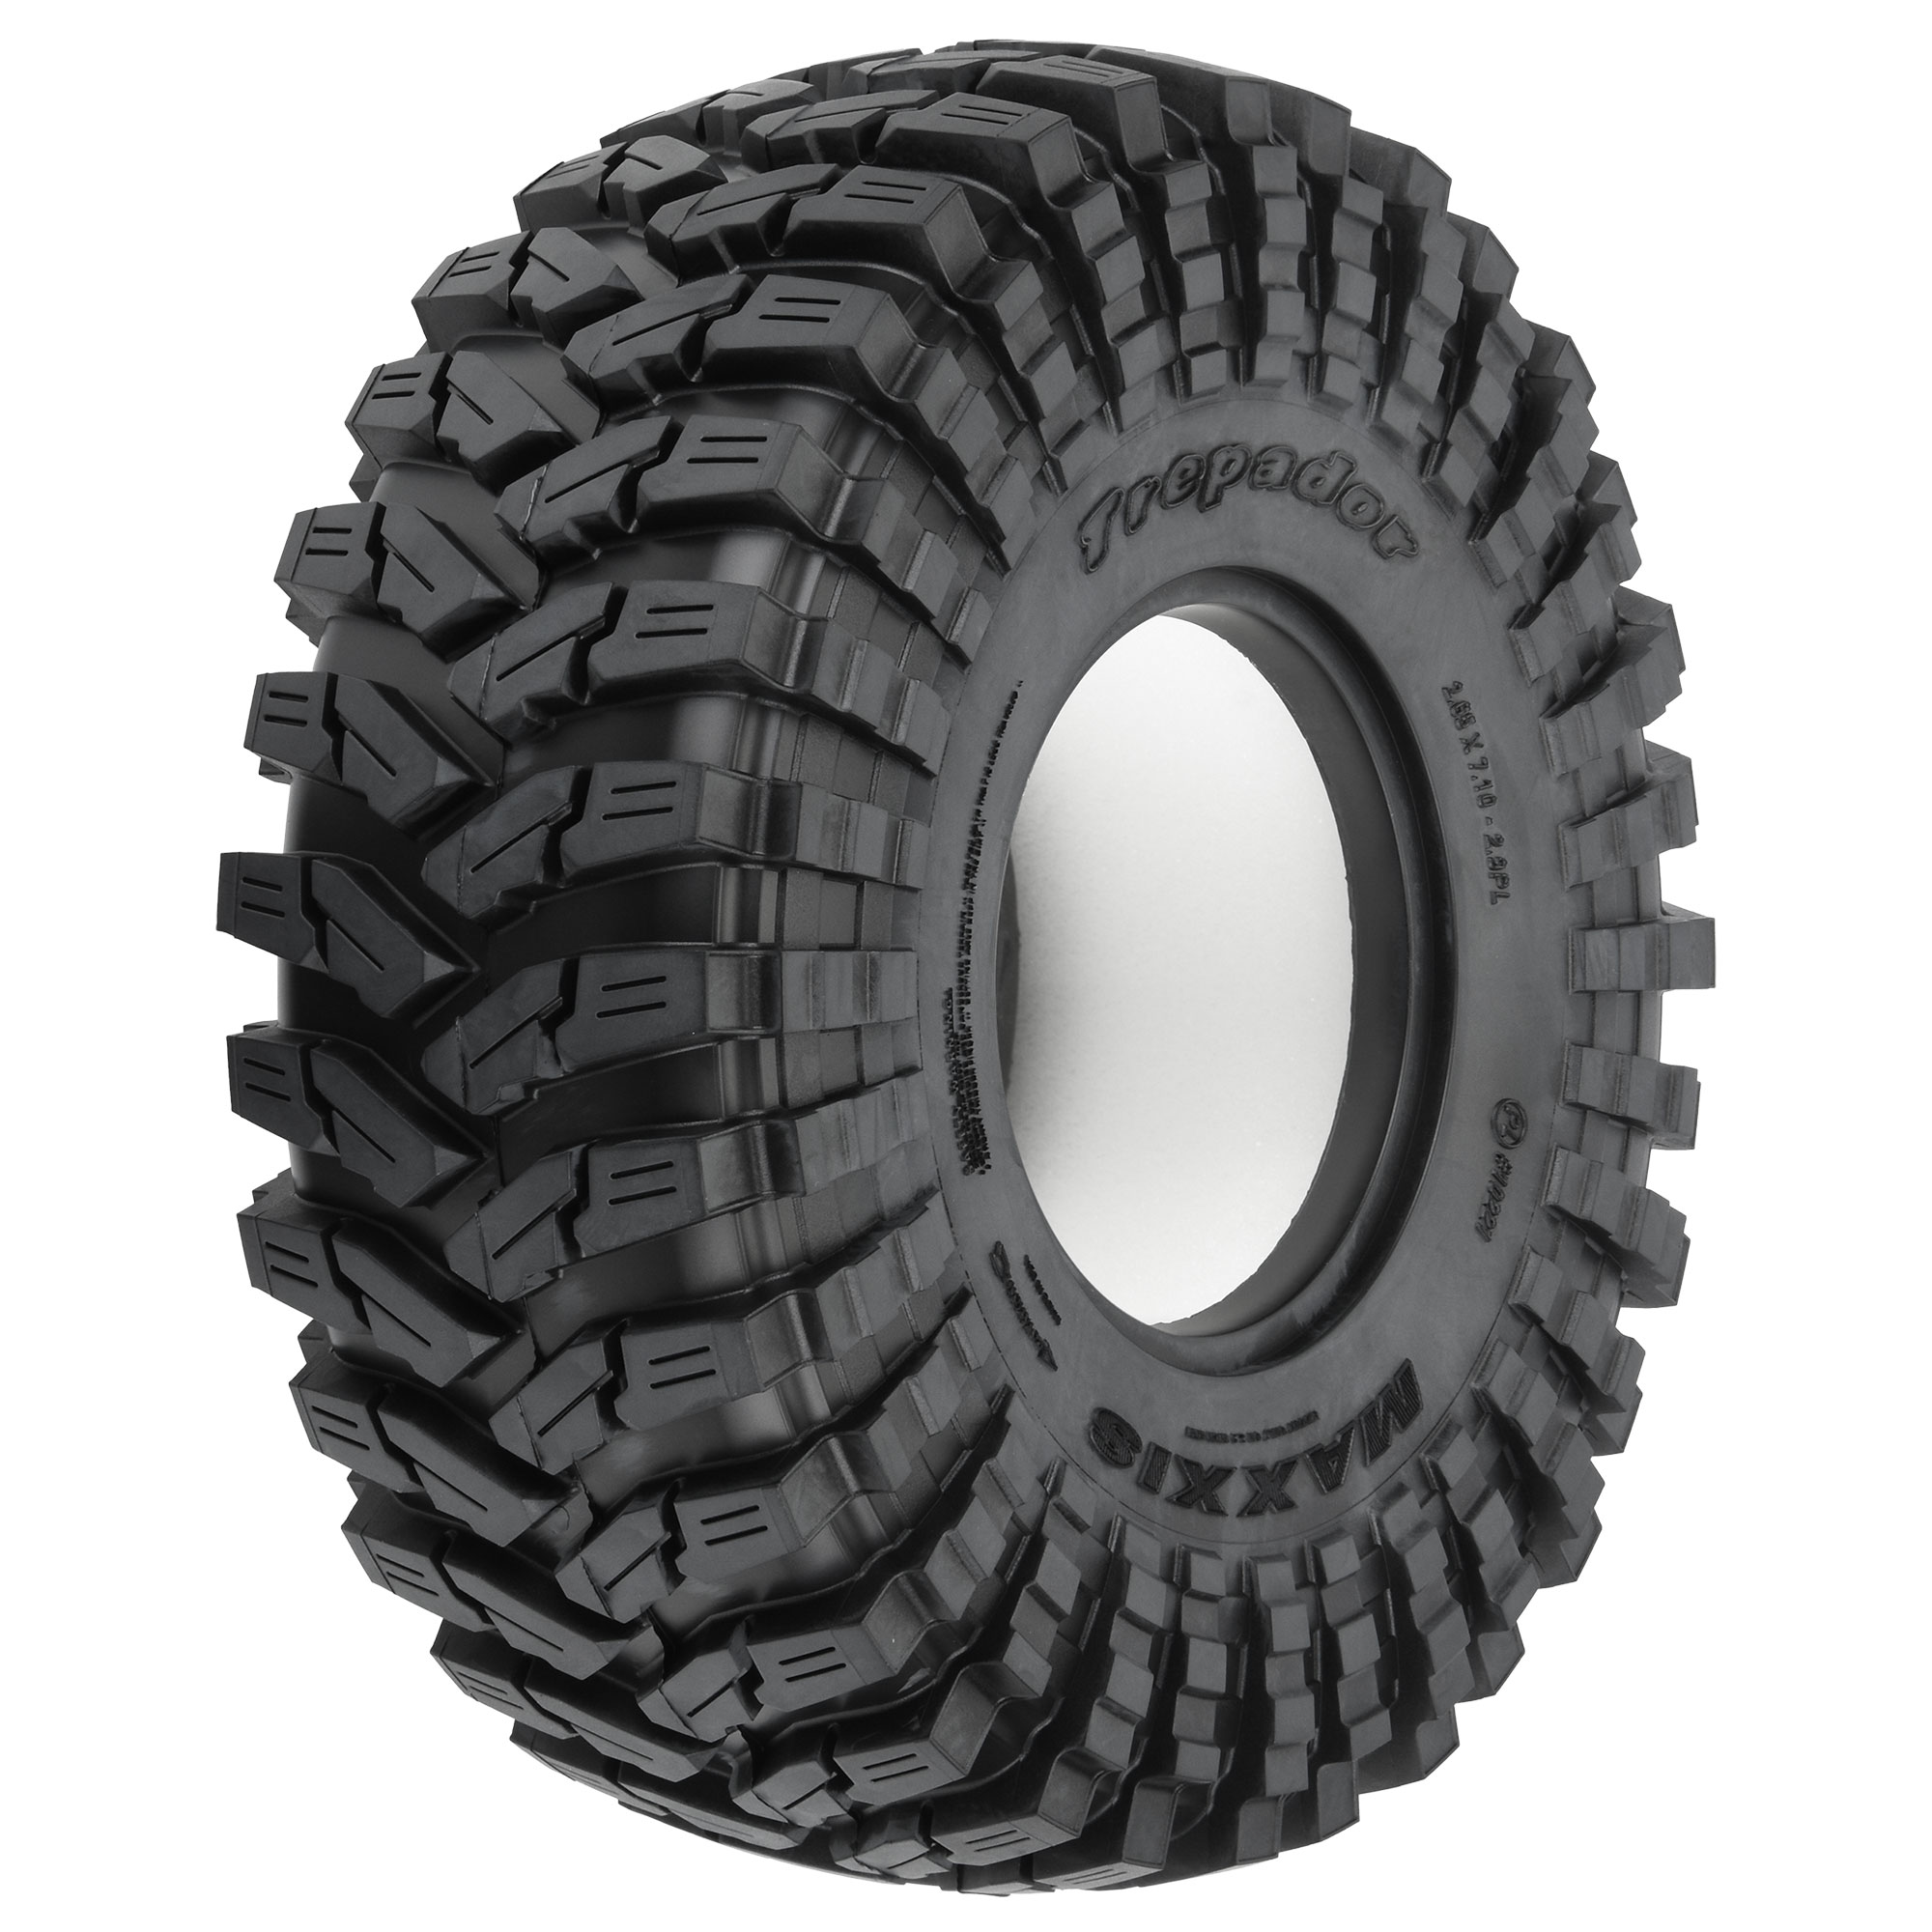 Extreme Off-Road - MAXXIS US